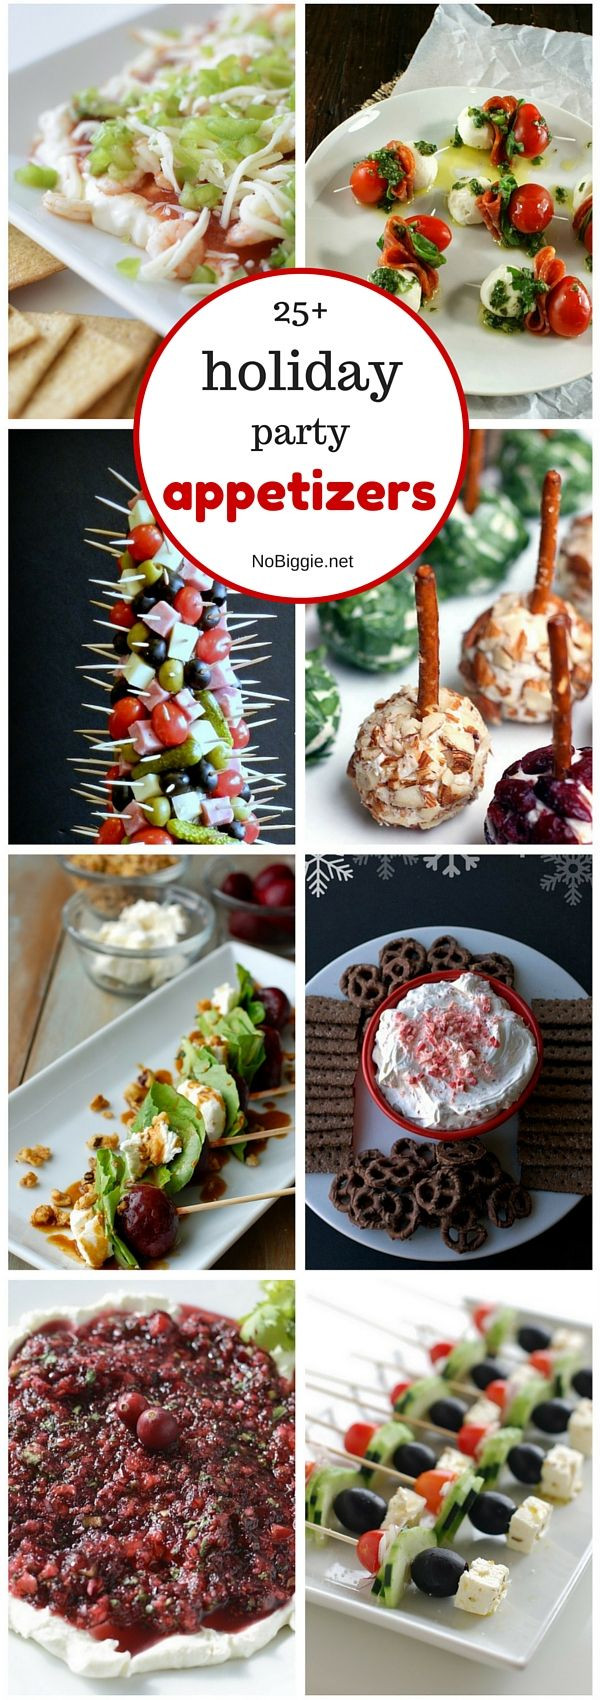 Christmas Party Appetizers Finger Foods
 25 holiday party appetizers NoBiggie Roundups